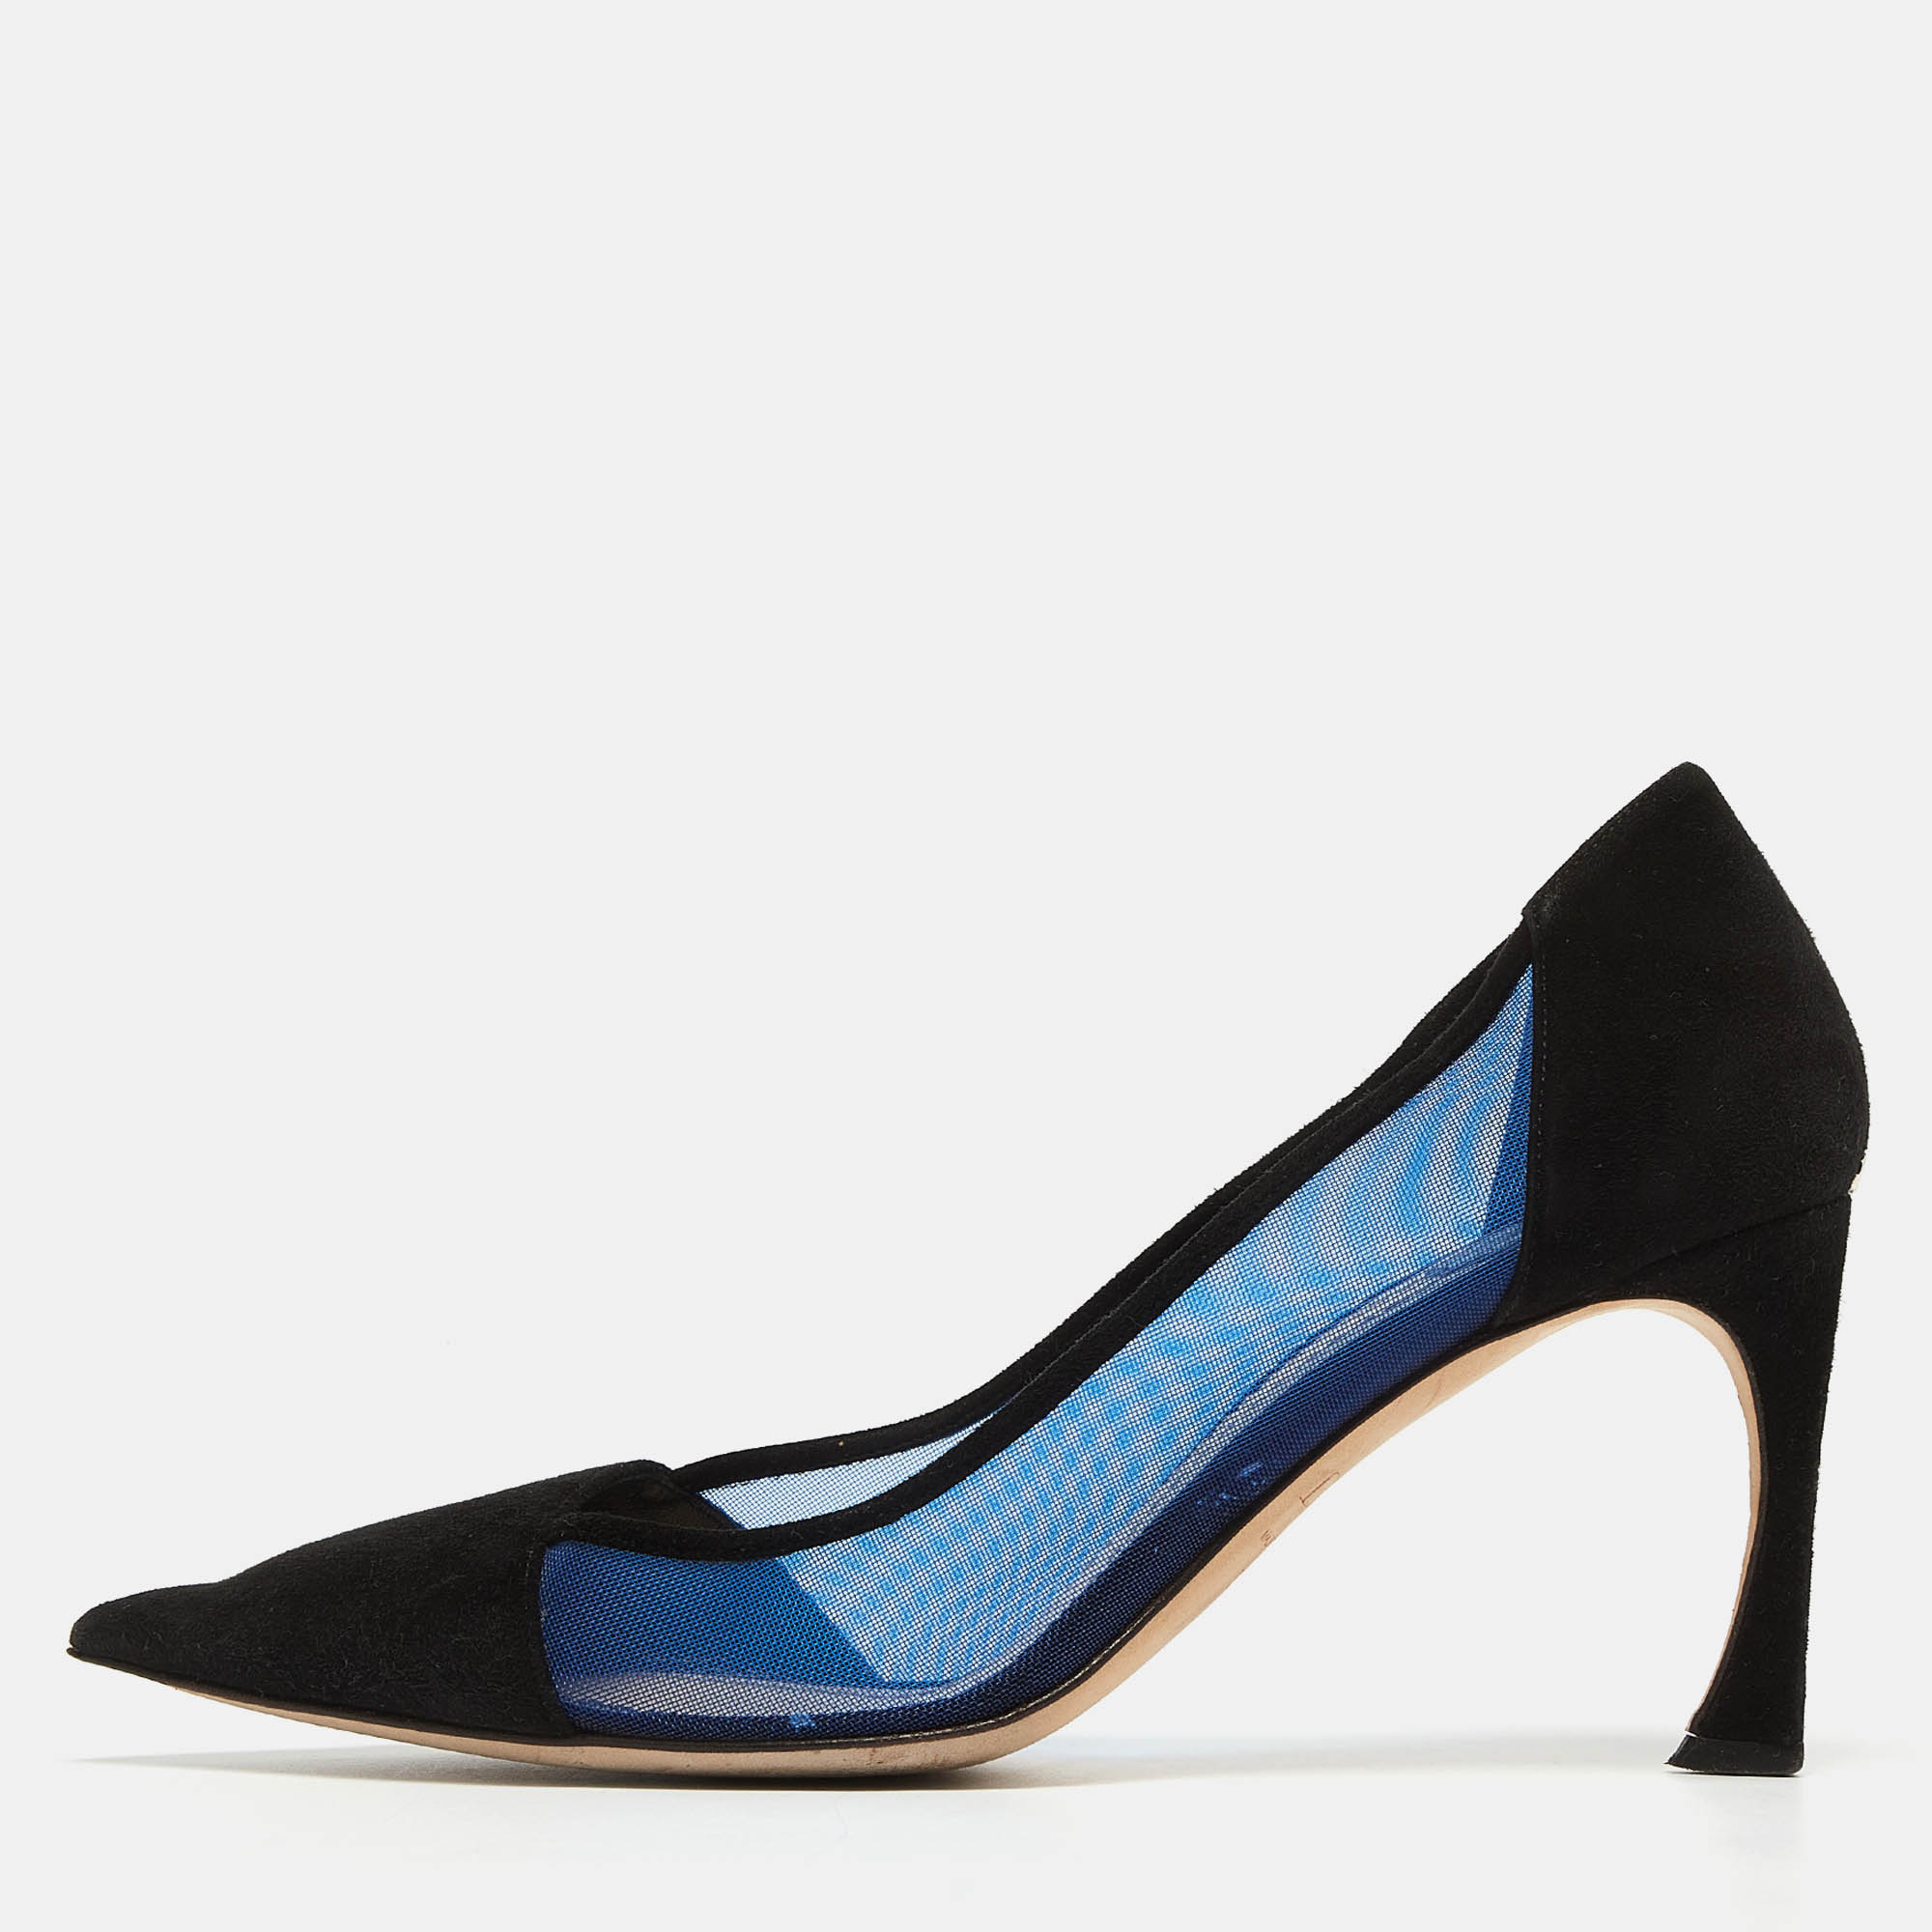 Dior black/blue suede and mesh pointed toe pumps size 39.5